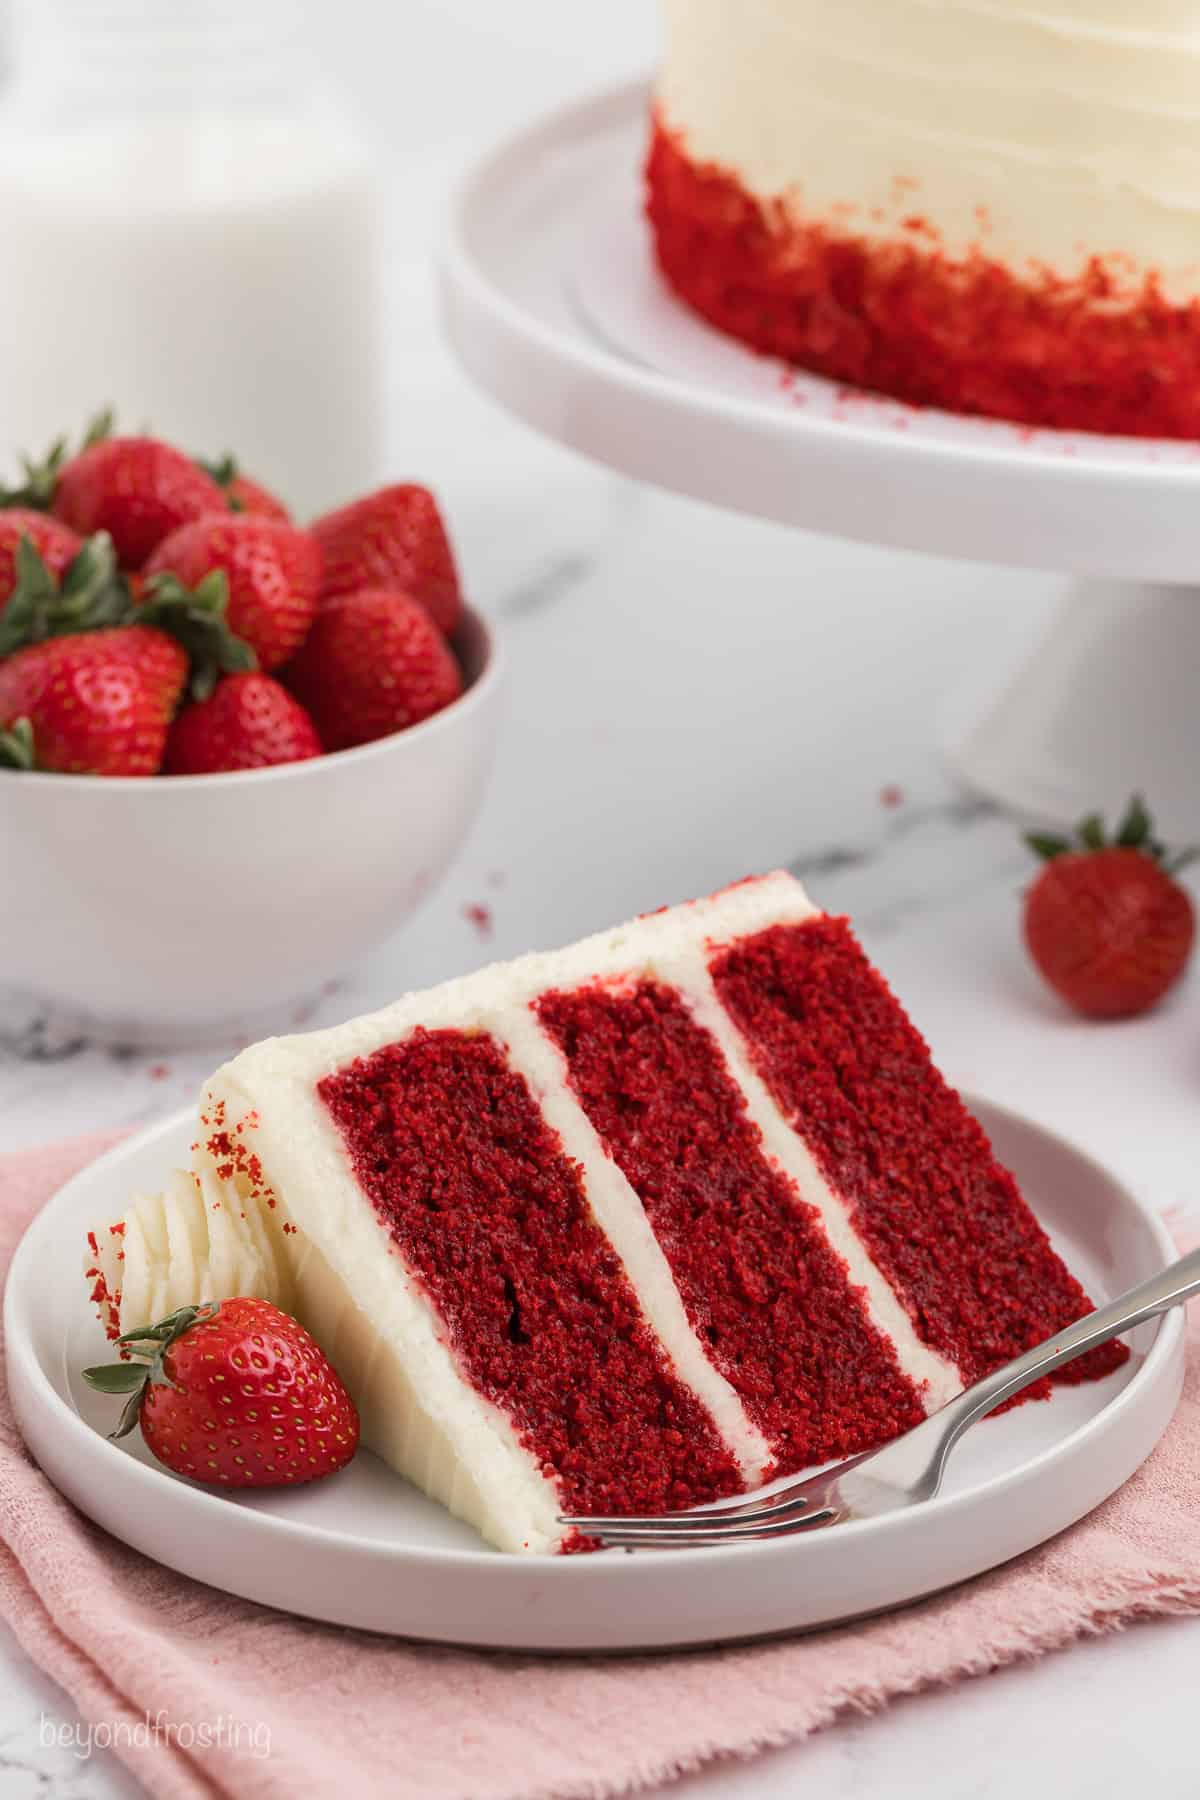 A slice of three-layer frosted red velvet cake on a plate next to a fork, with a bowl of strawberries and the rest of the cake in the background.